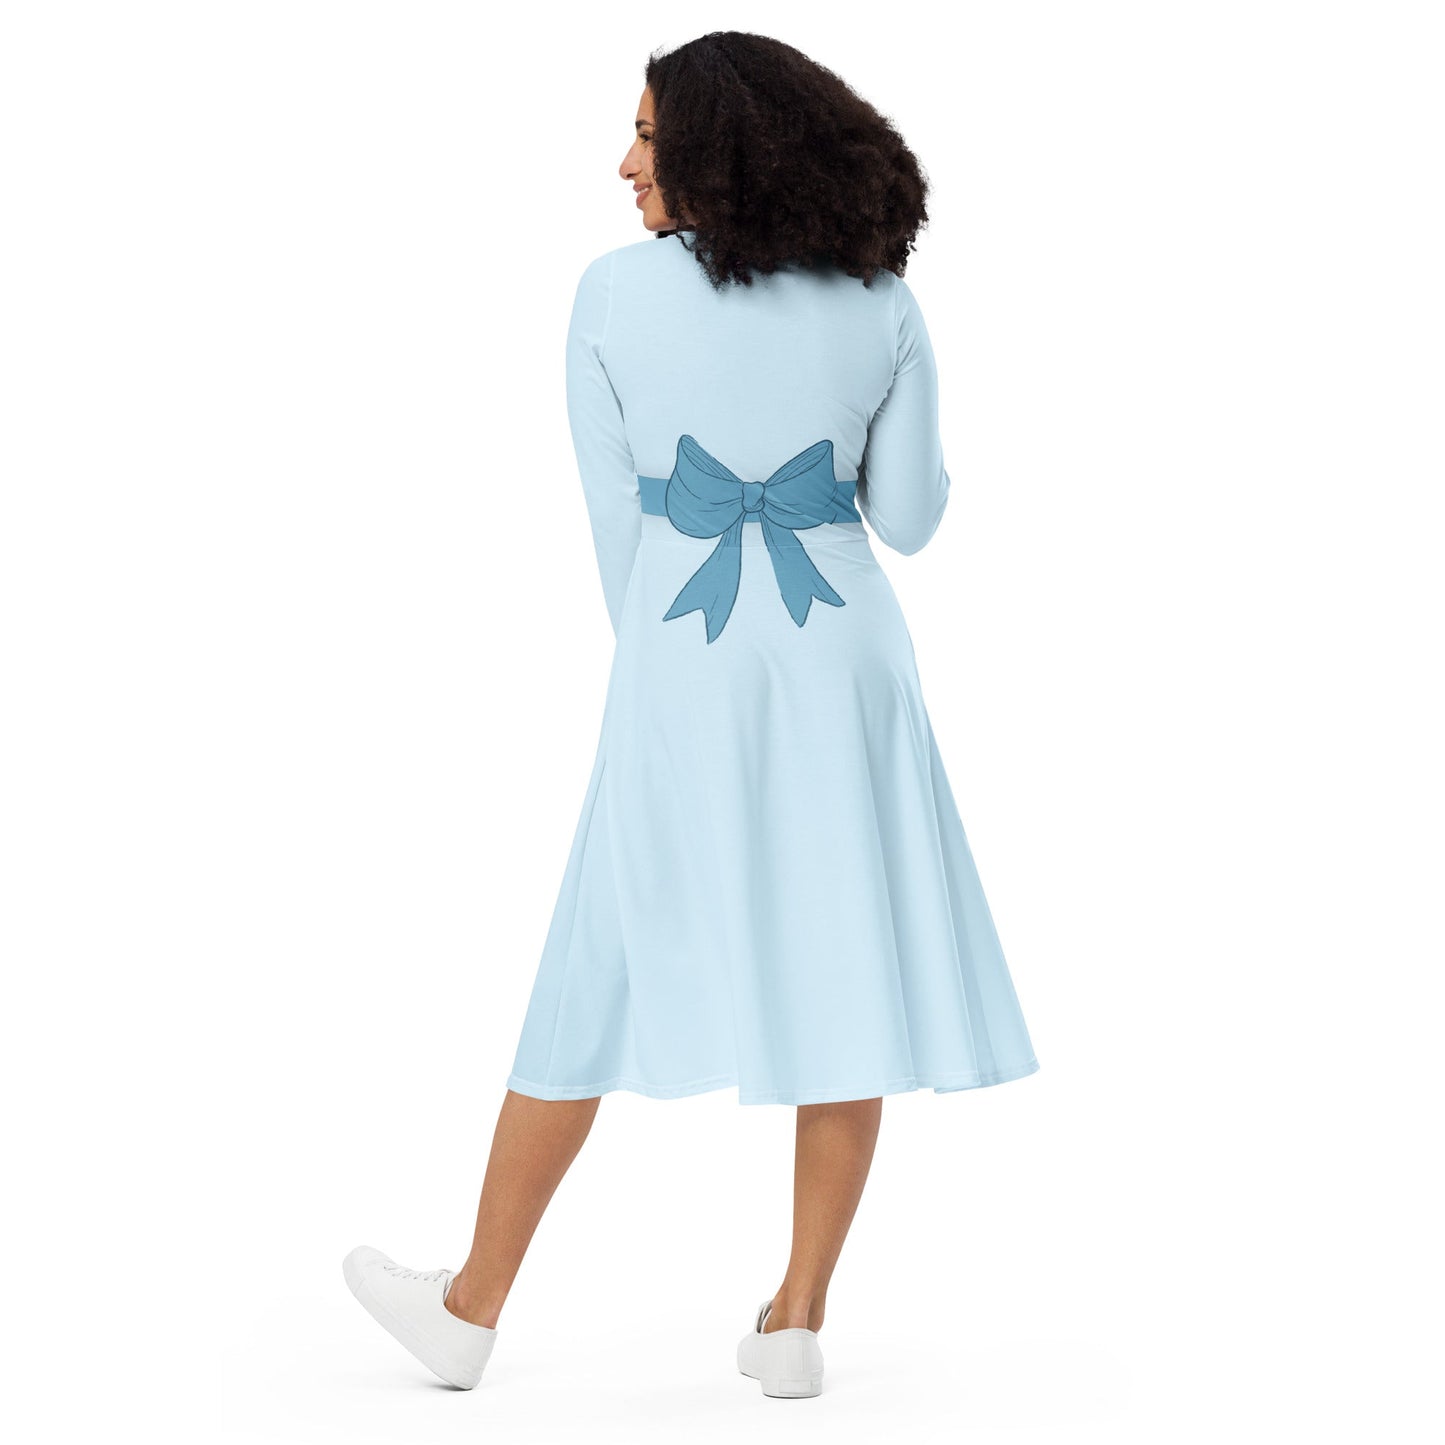 The Wendy Darling long sleeve midi dress adult wendy dressAll Over PrintSkater DressWrong Lever Clothing